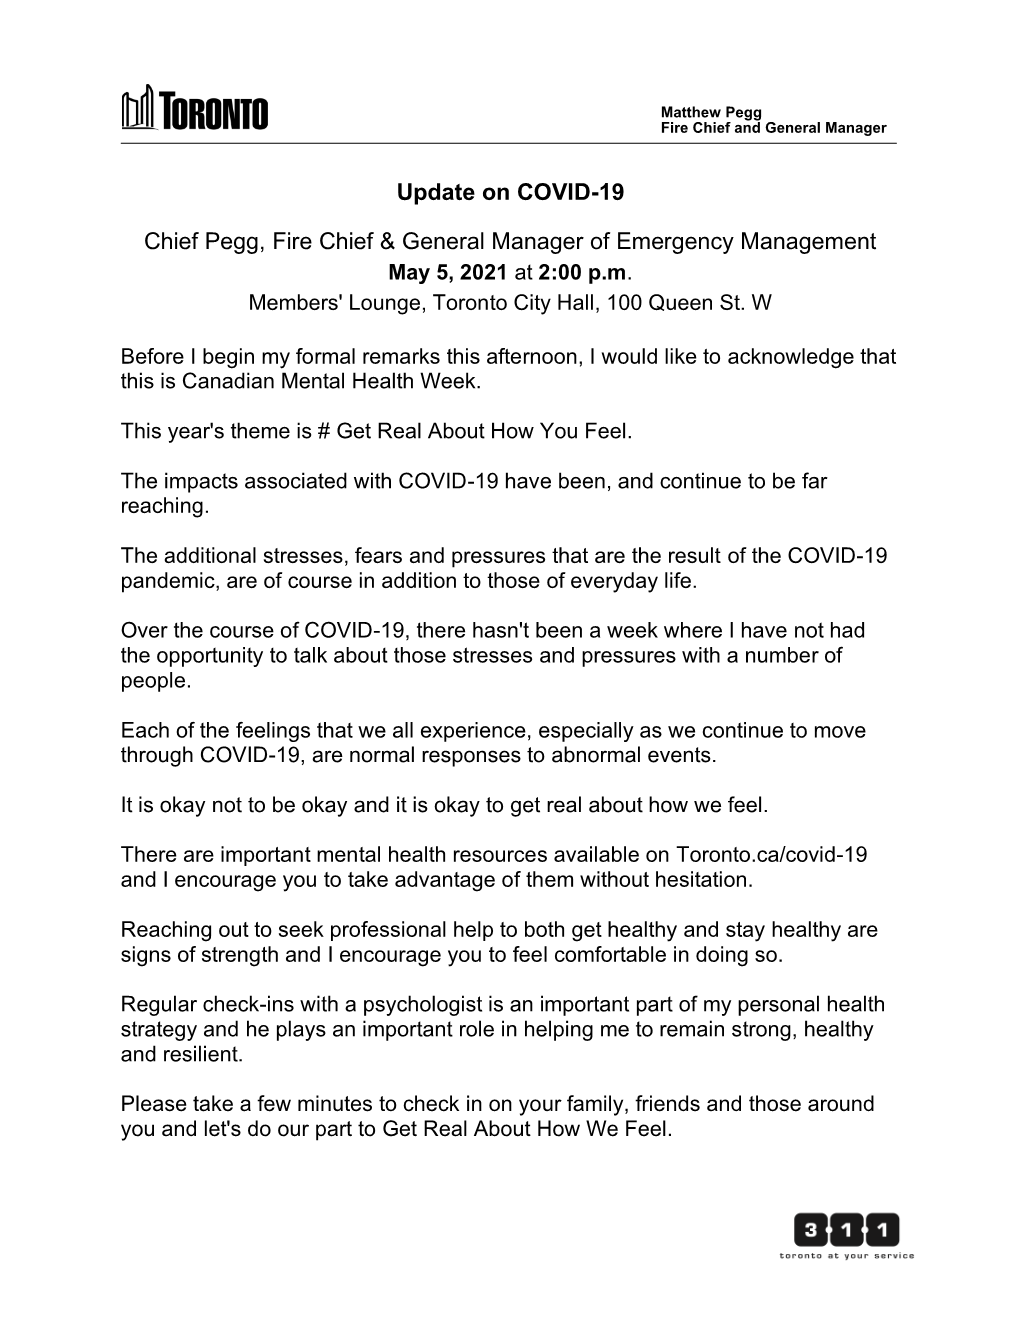 Chief Pegg Update on COVID, May 5, 2021